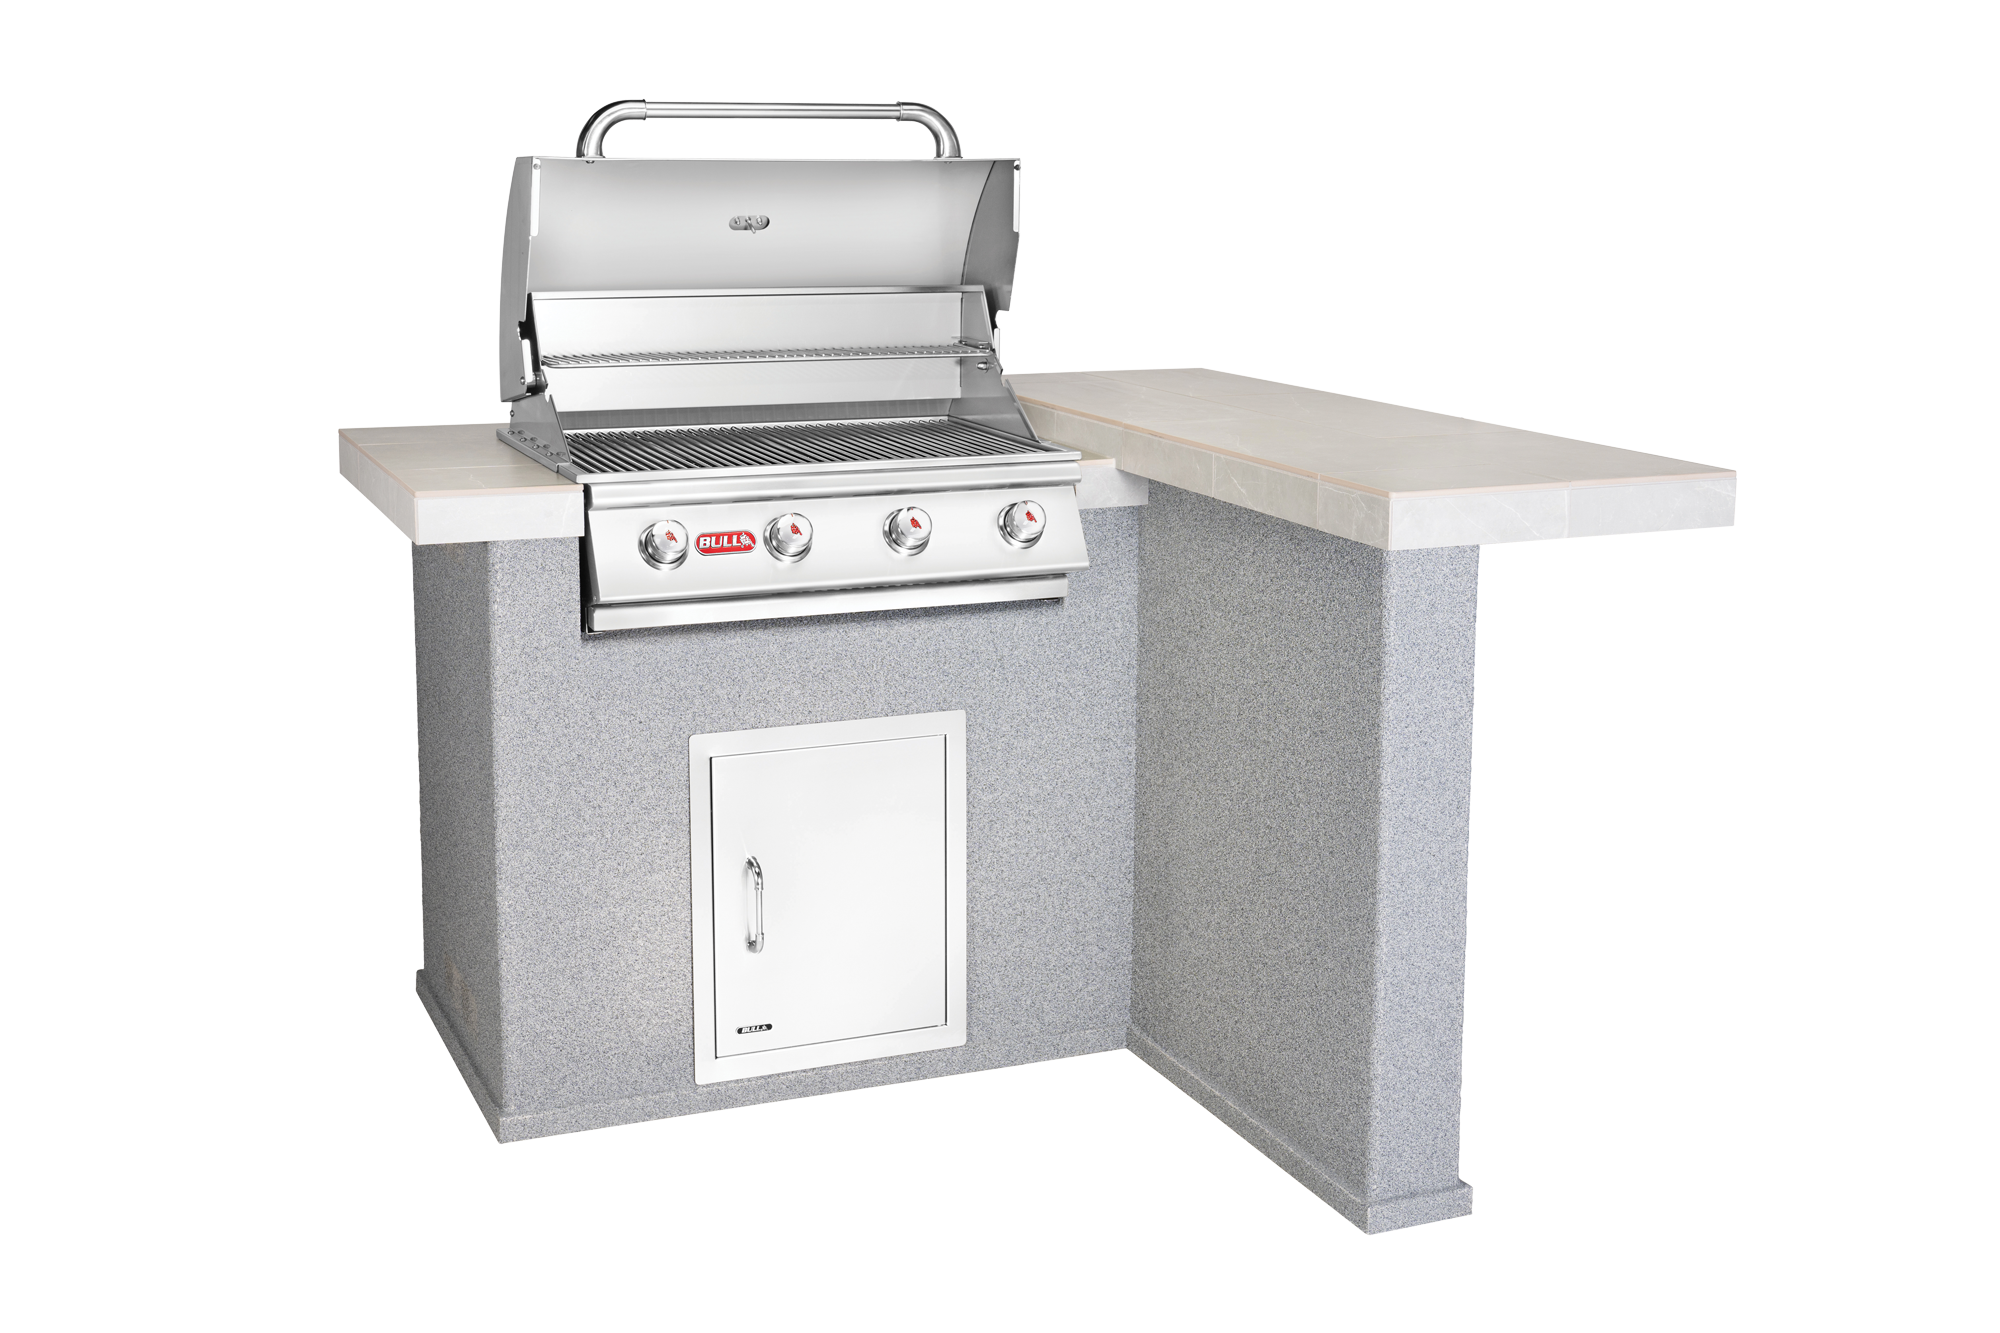 Patio Q L Shaped Grill Outdoor kitchen - Open